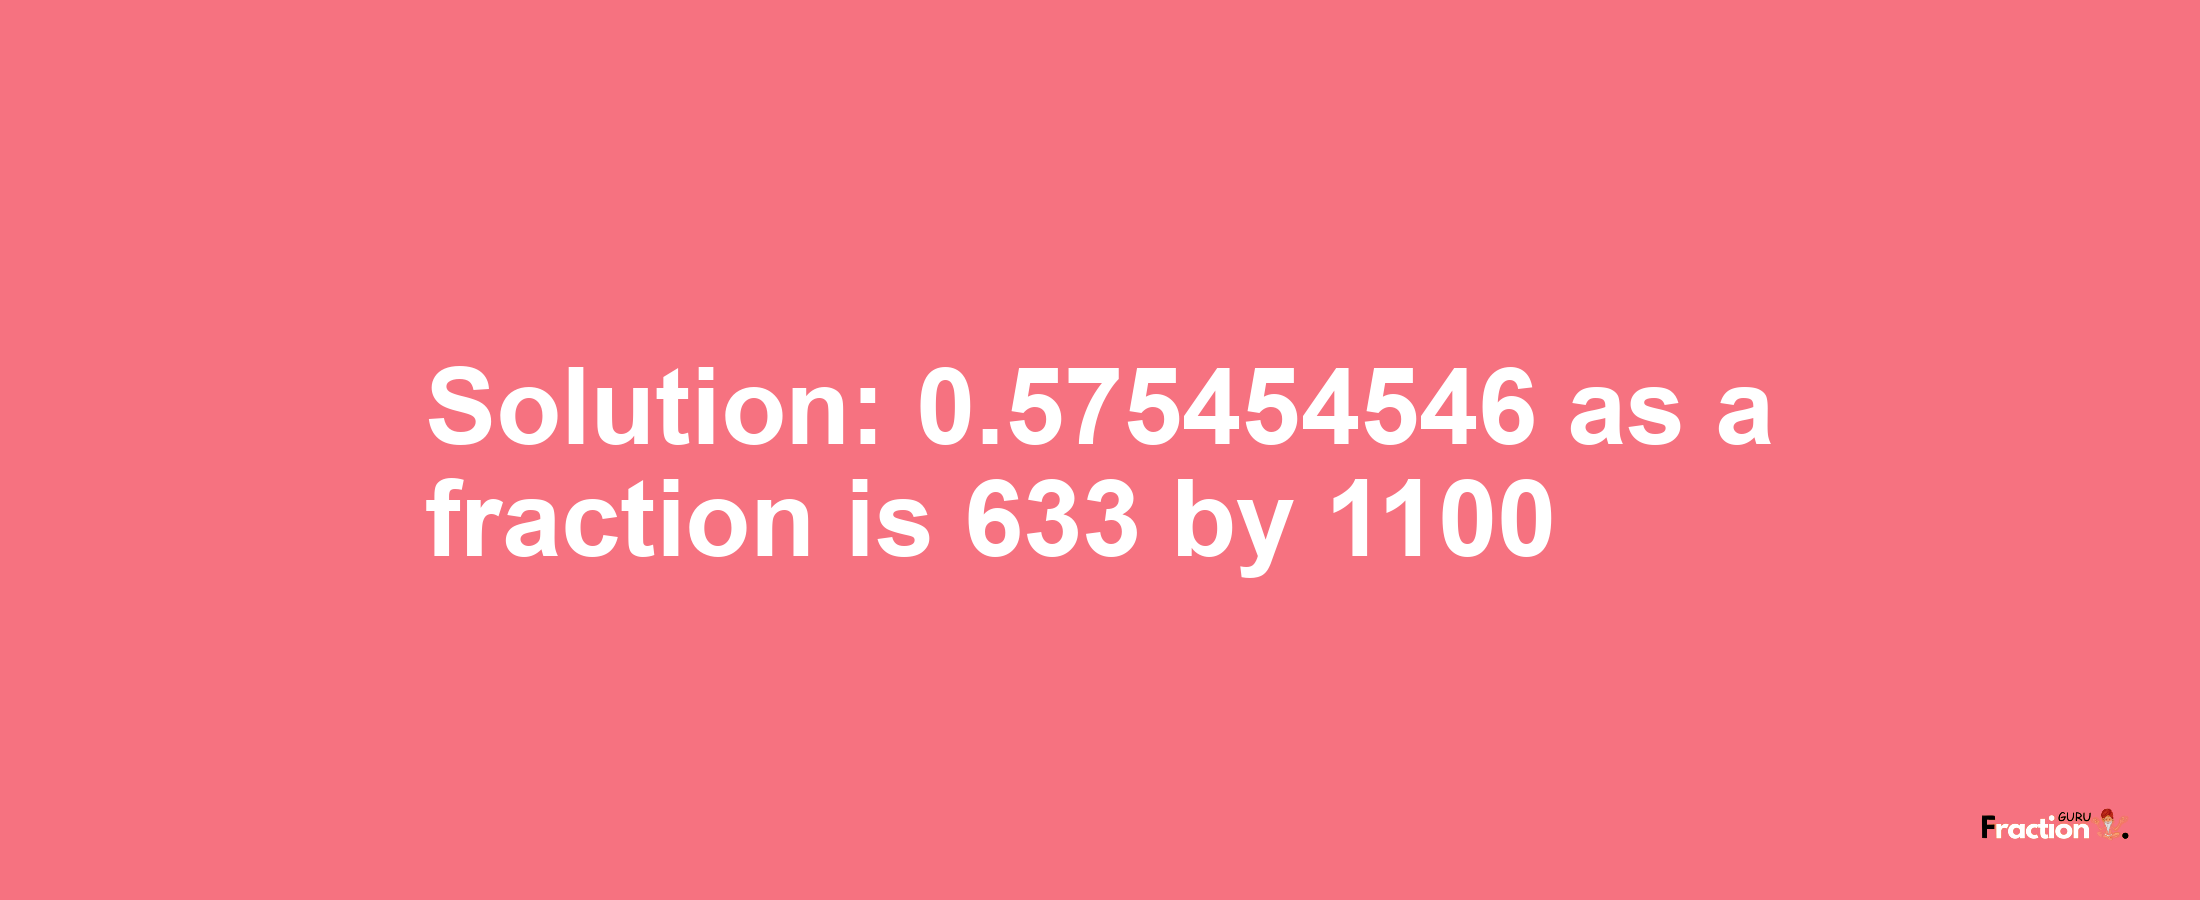 Solution:0.575454546 as a fraction is 633/1100